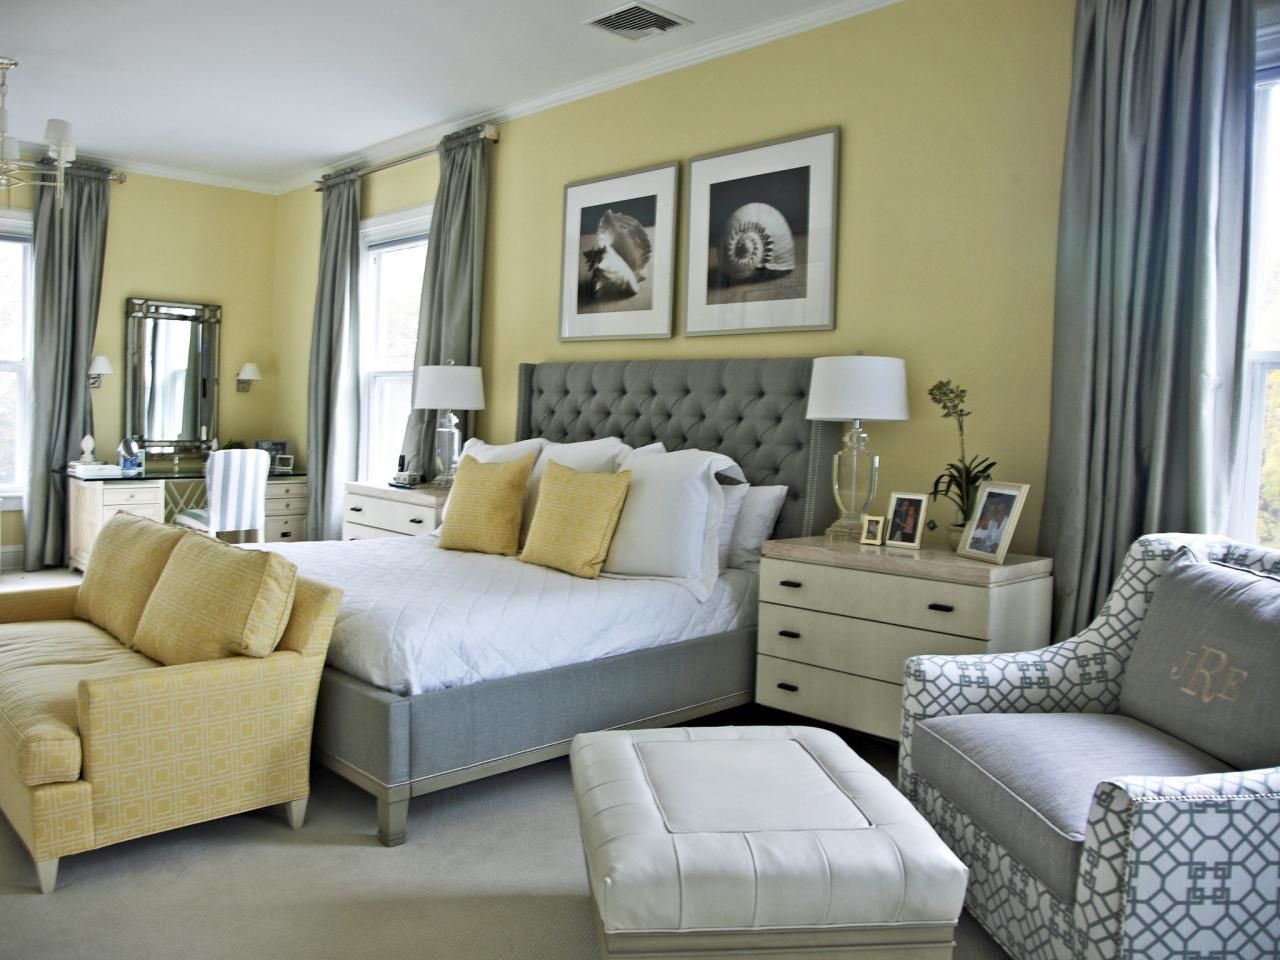 Gorgeous gray and yellow bedroom